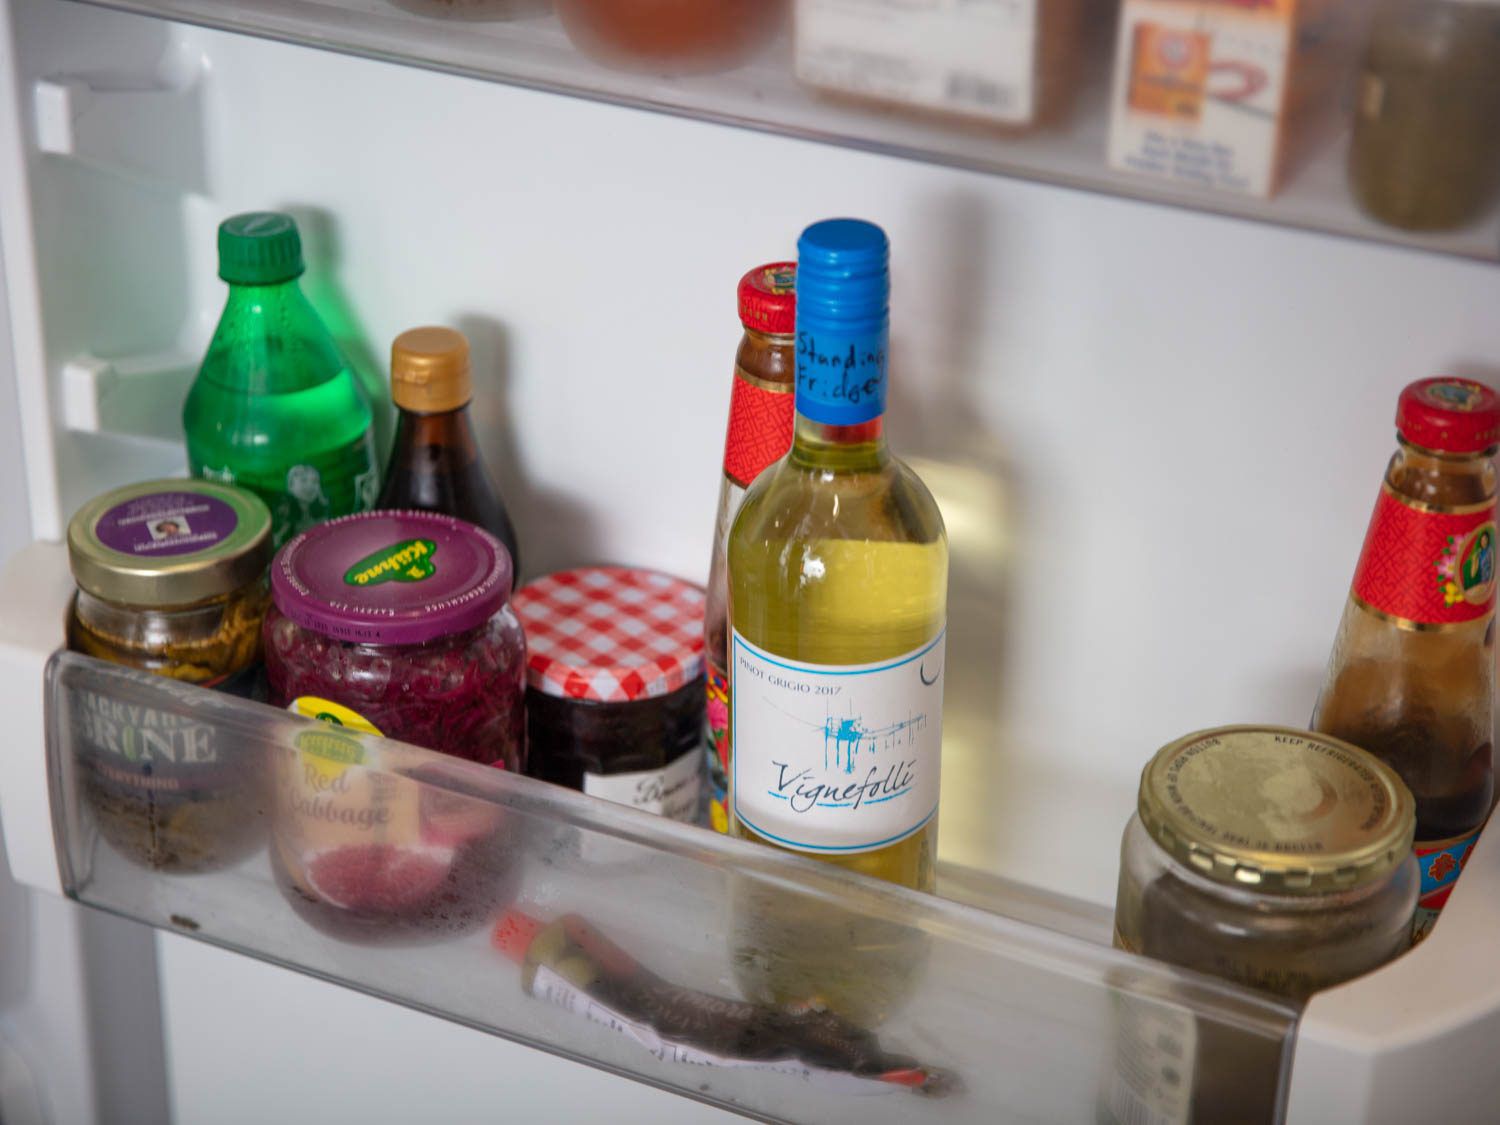 A bottle of white wine upright in the door of a refrigerator, next to a jar of jam and other condiments.